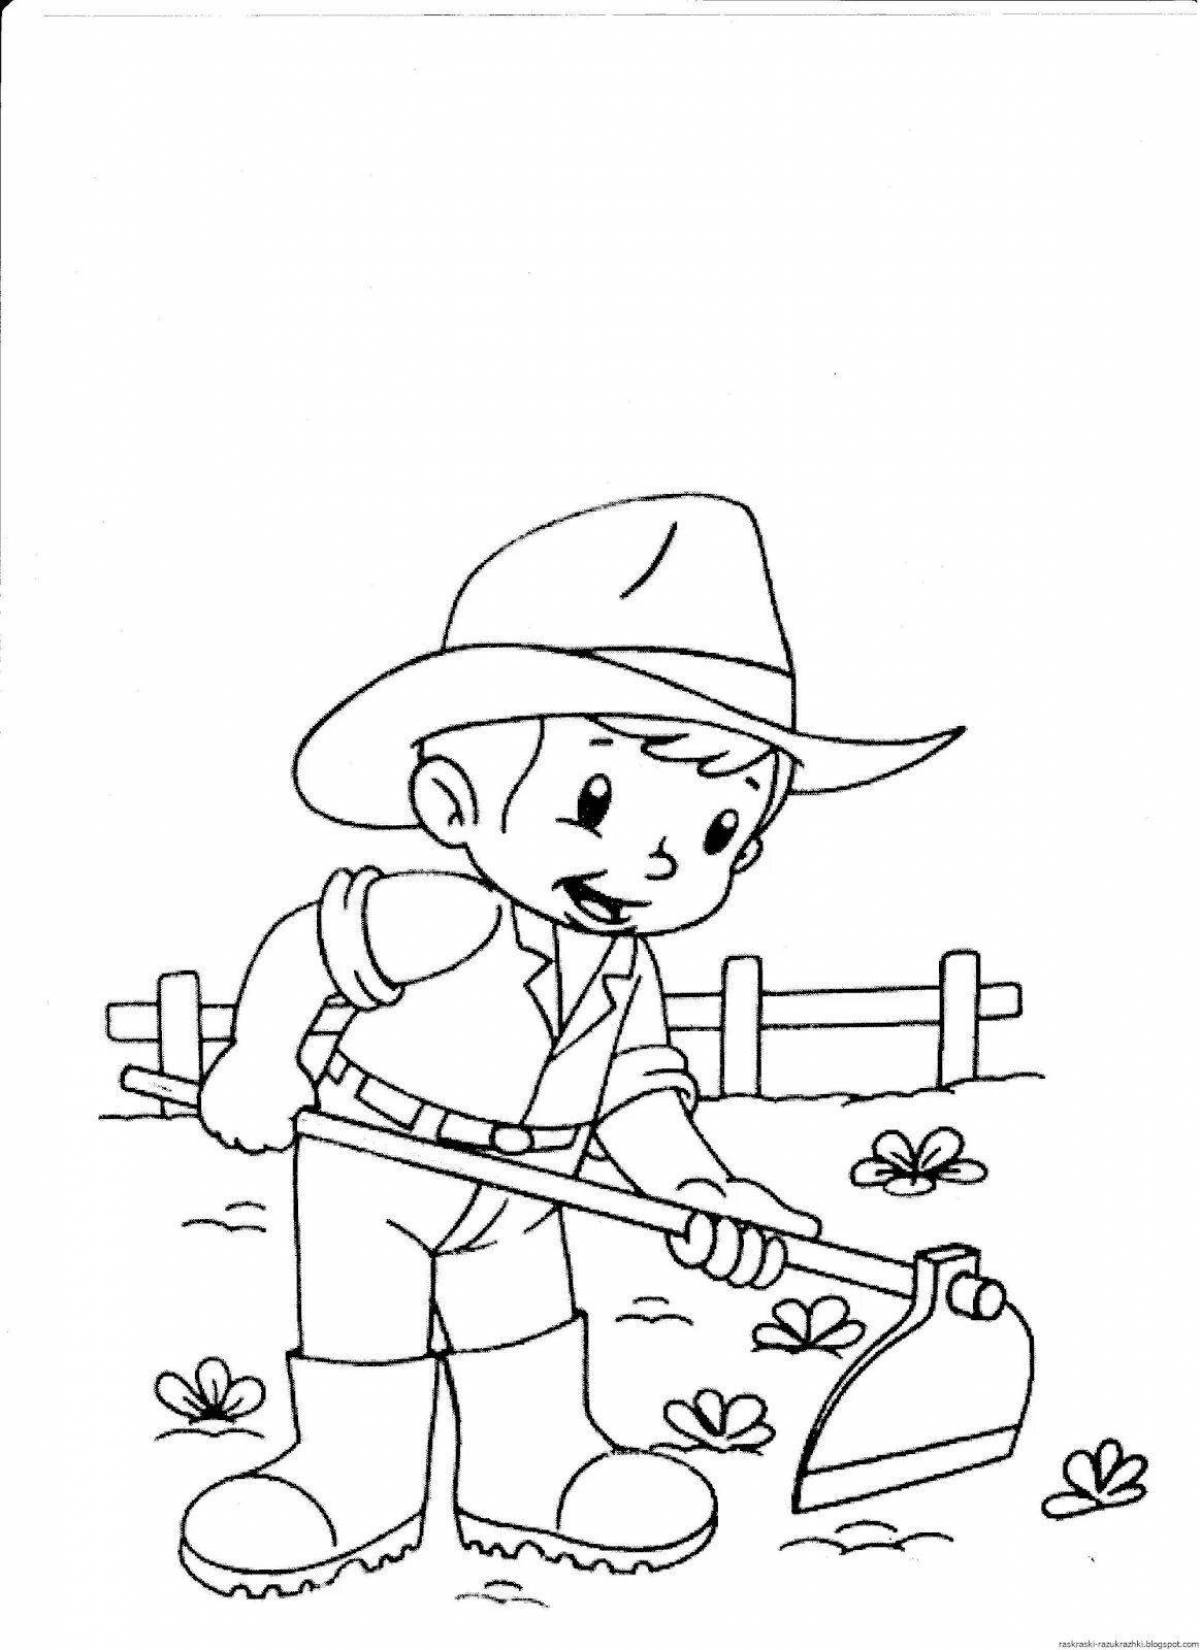 Coloring page happy farmer for kids